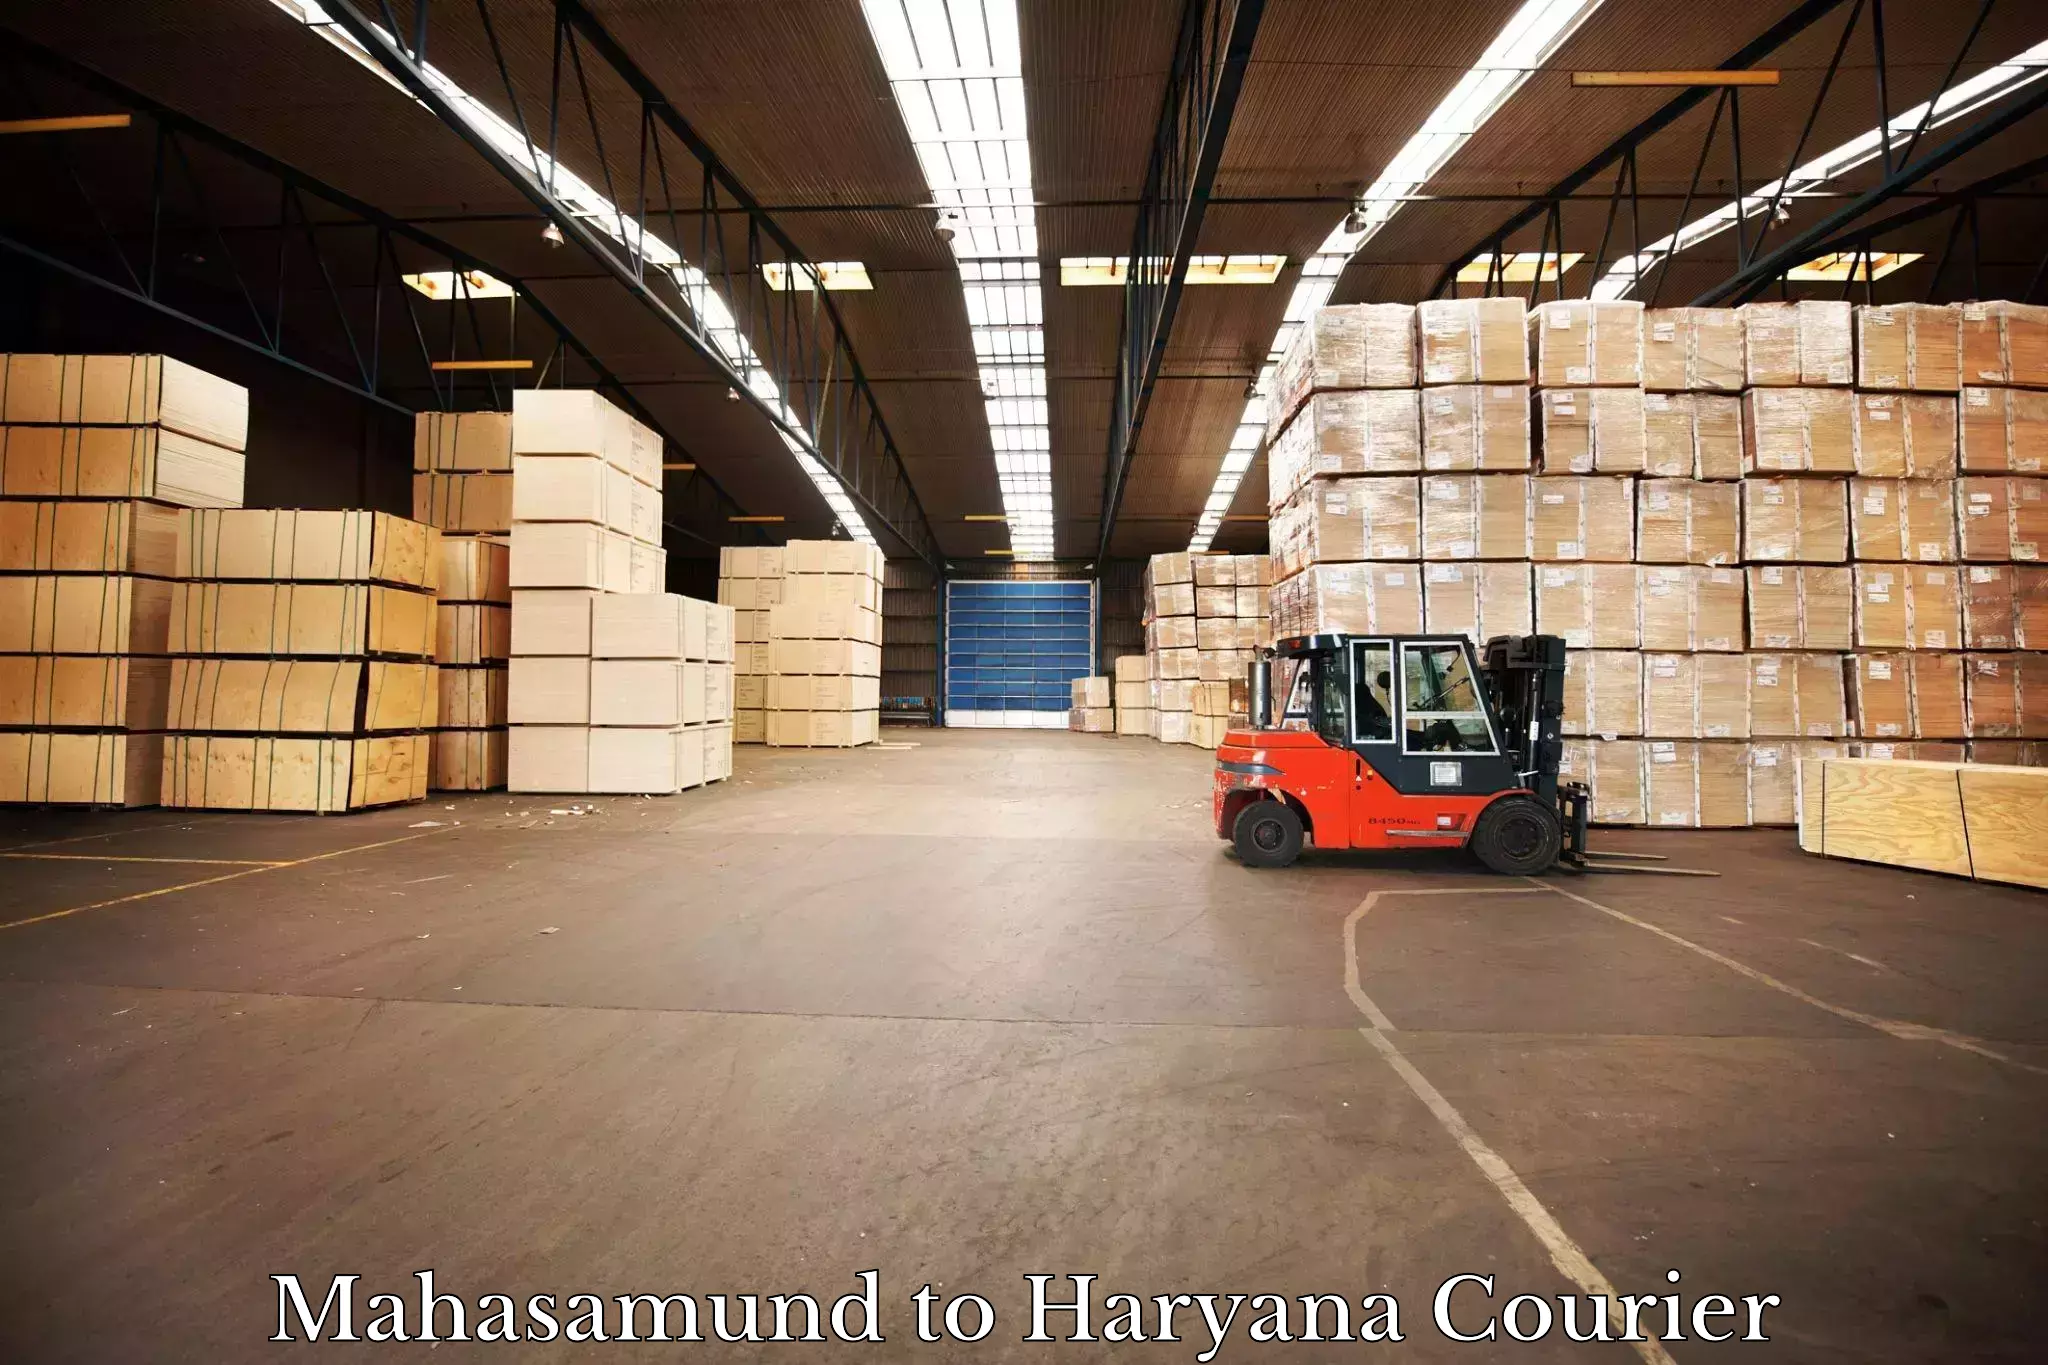 Express delivery capabilities Mahasamund to Sonipat